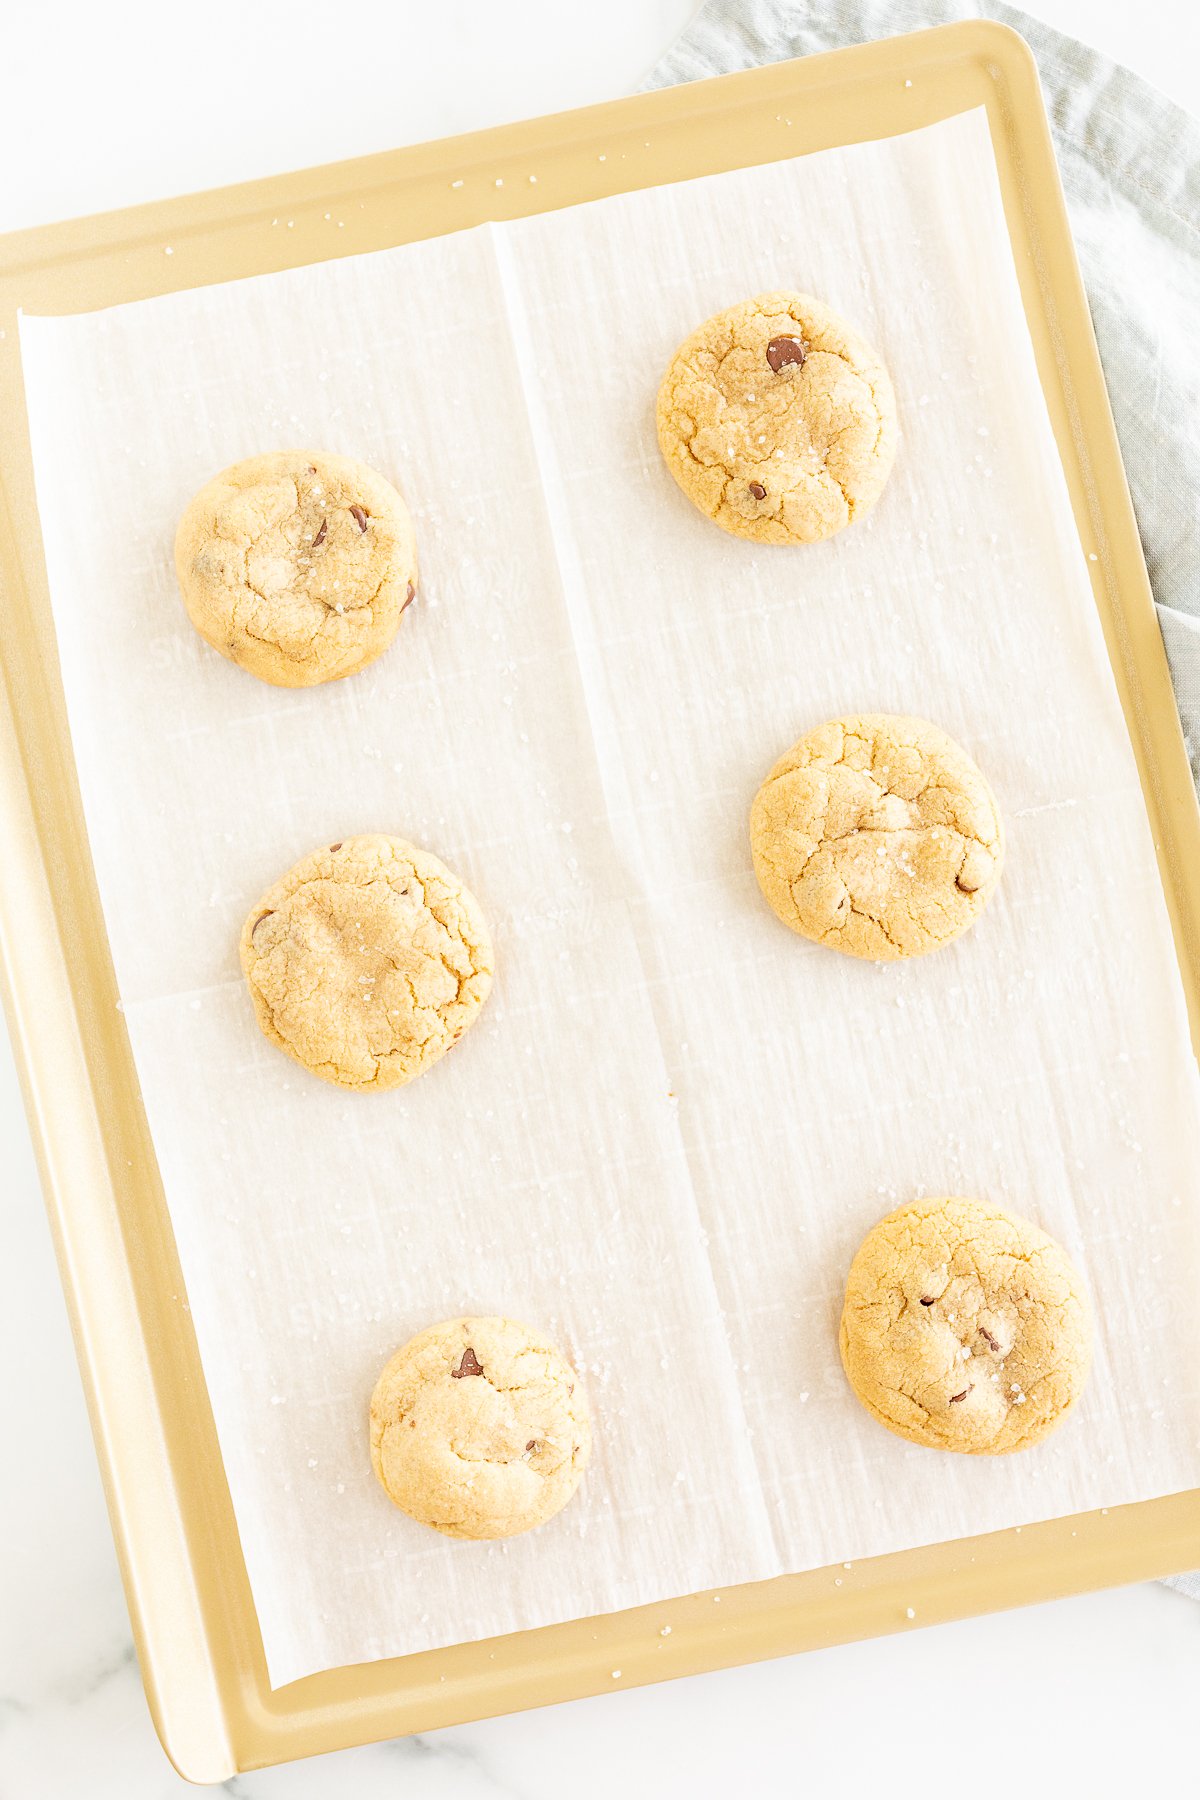 Kitchen gifts of delicious chocolate chip cookies on a baking sheet.